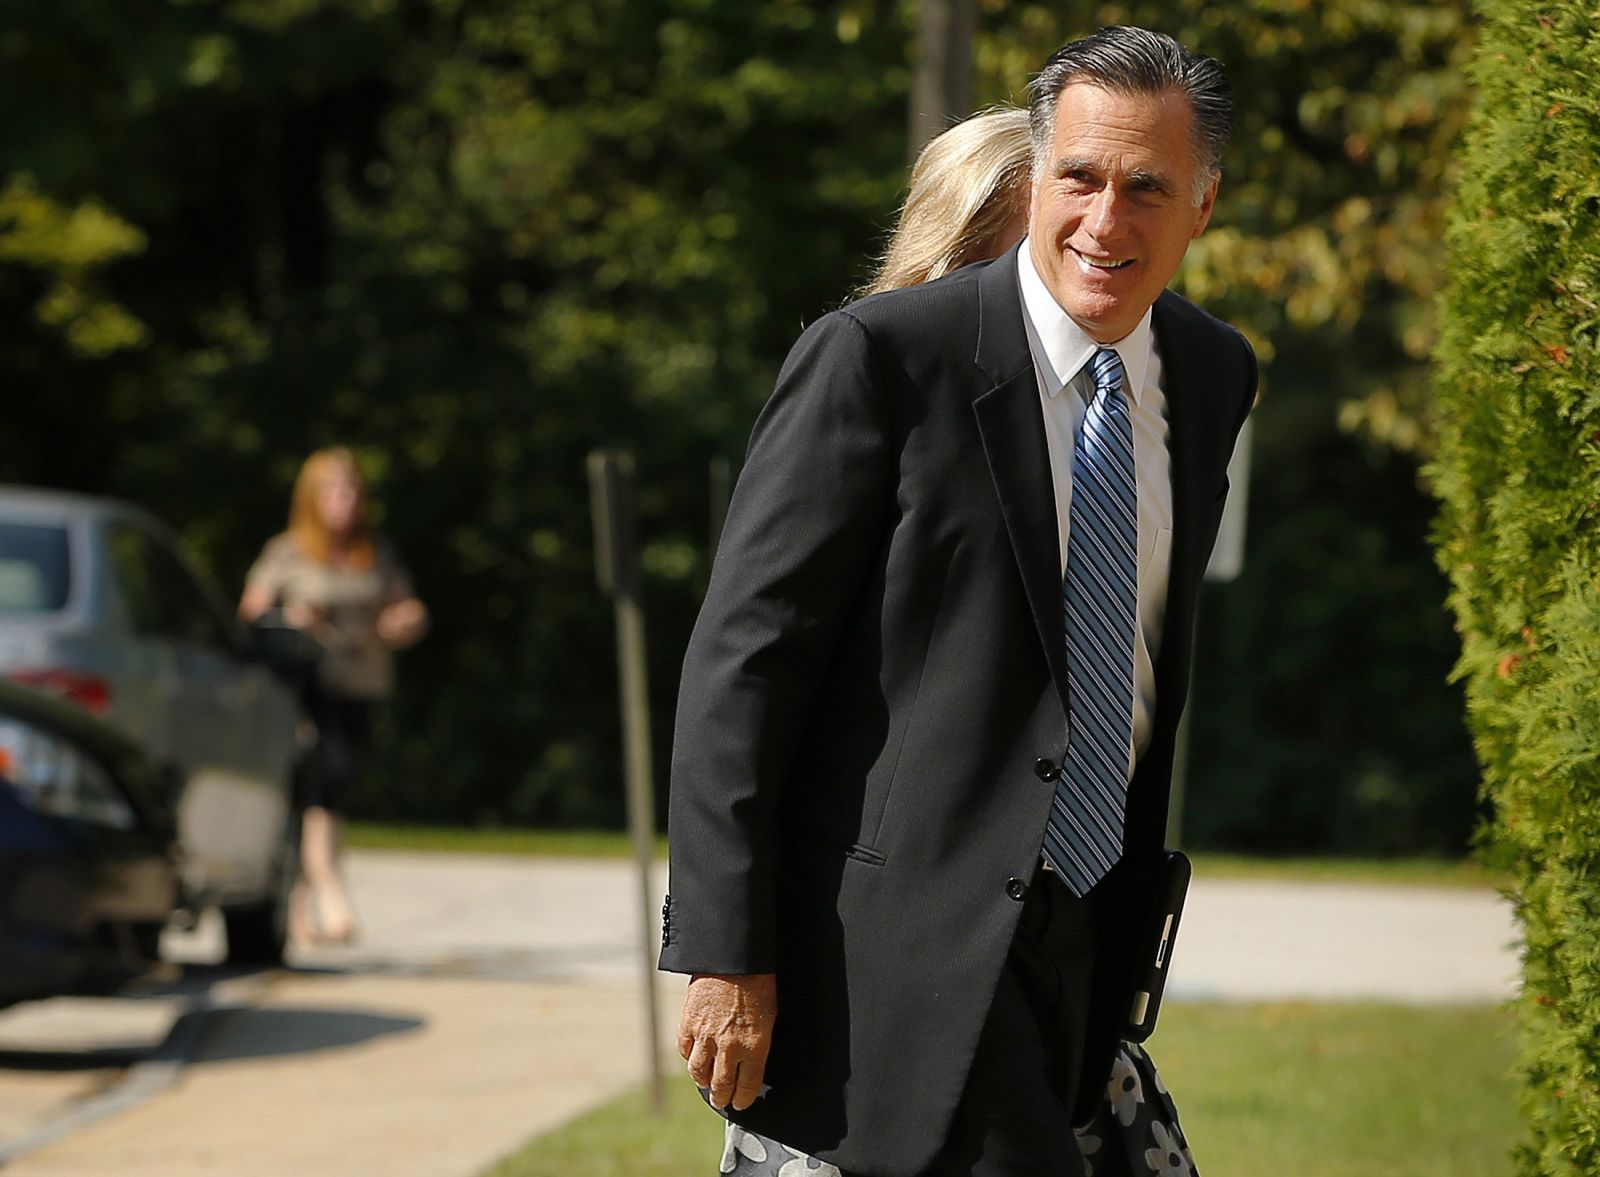 Republican presidential candidate and former Massachusetts Governor Mitt Romney arrives for services at The Church of Jesus Christ of Latter-Day Saints in Wolfboro